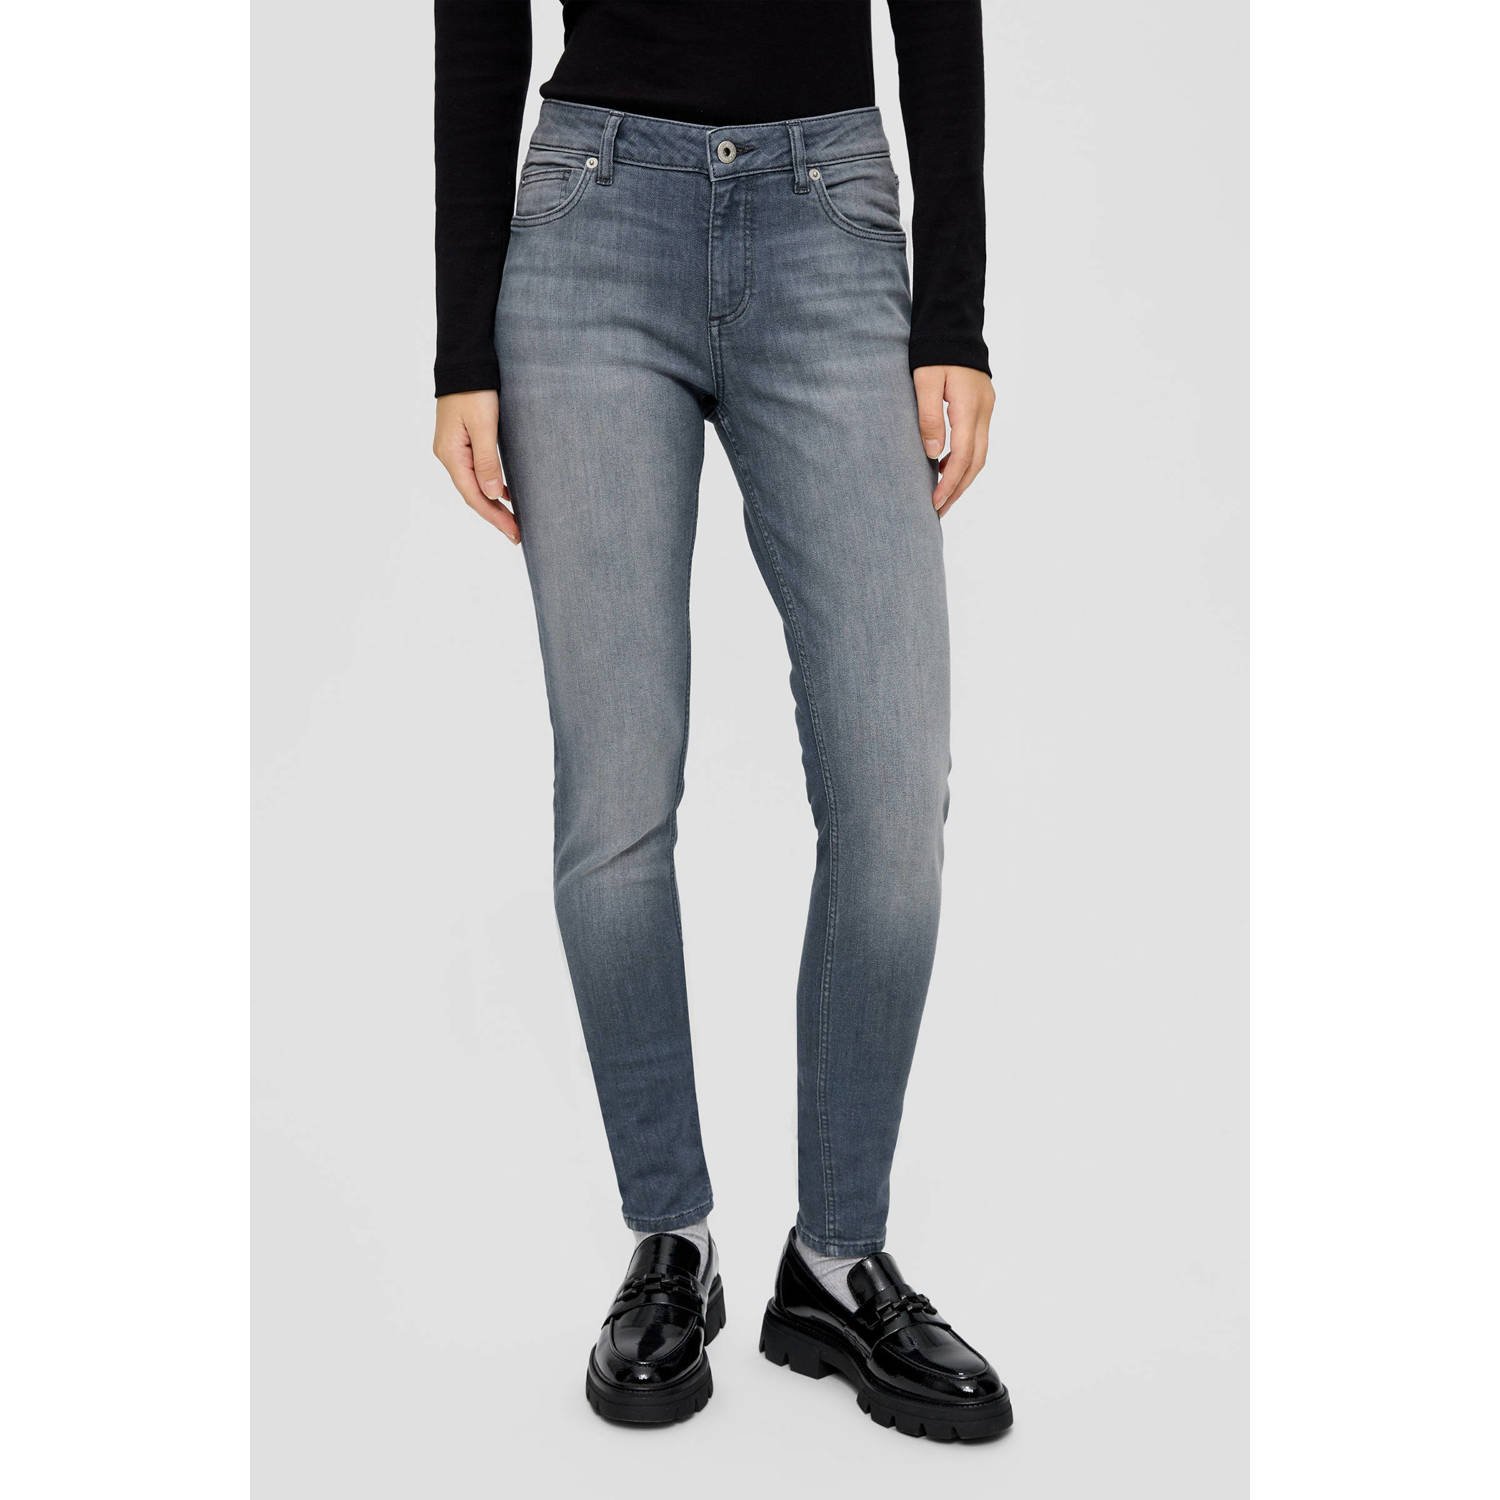 Q S by s.Oliver skinny jeans grijs